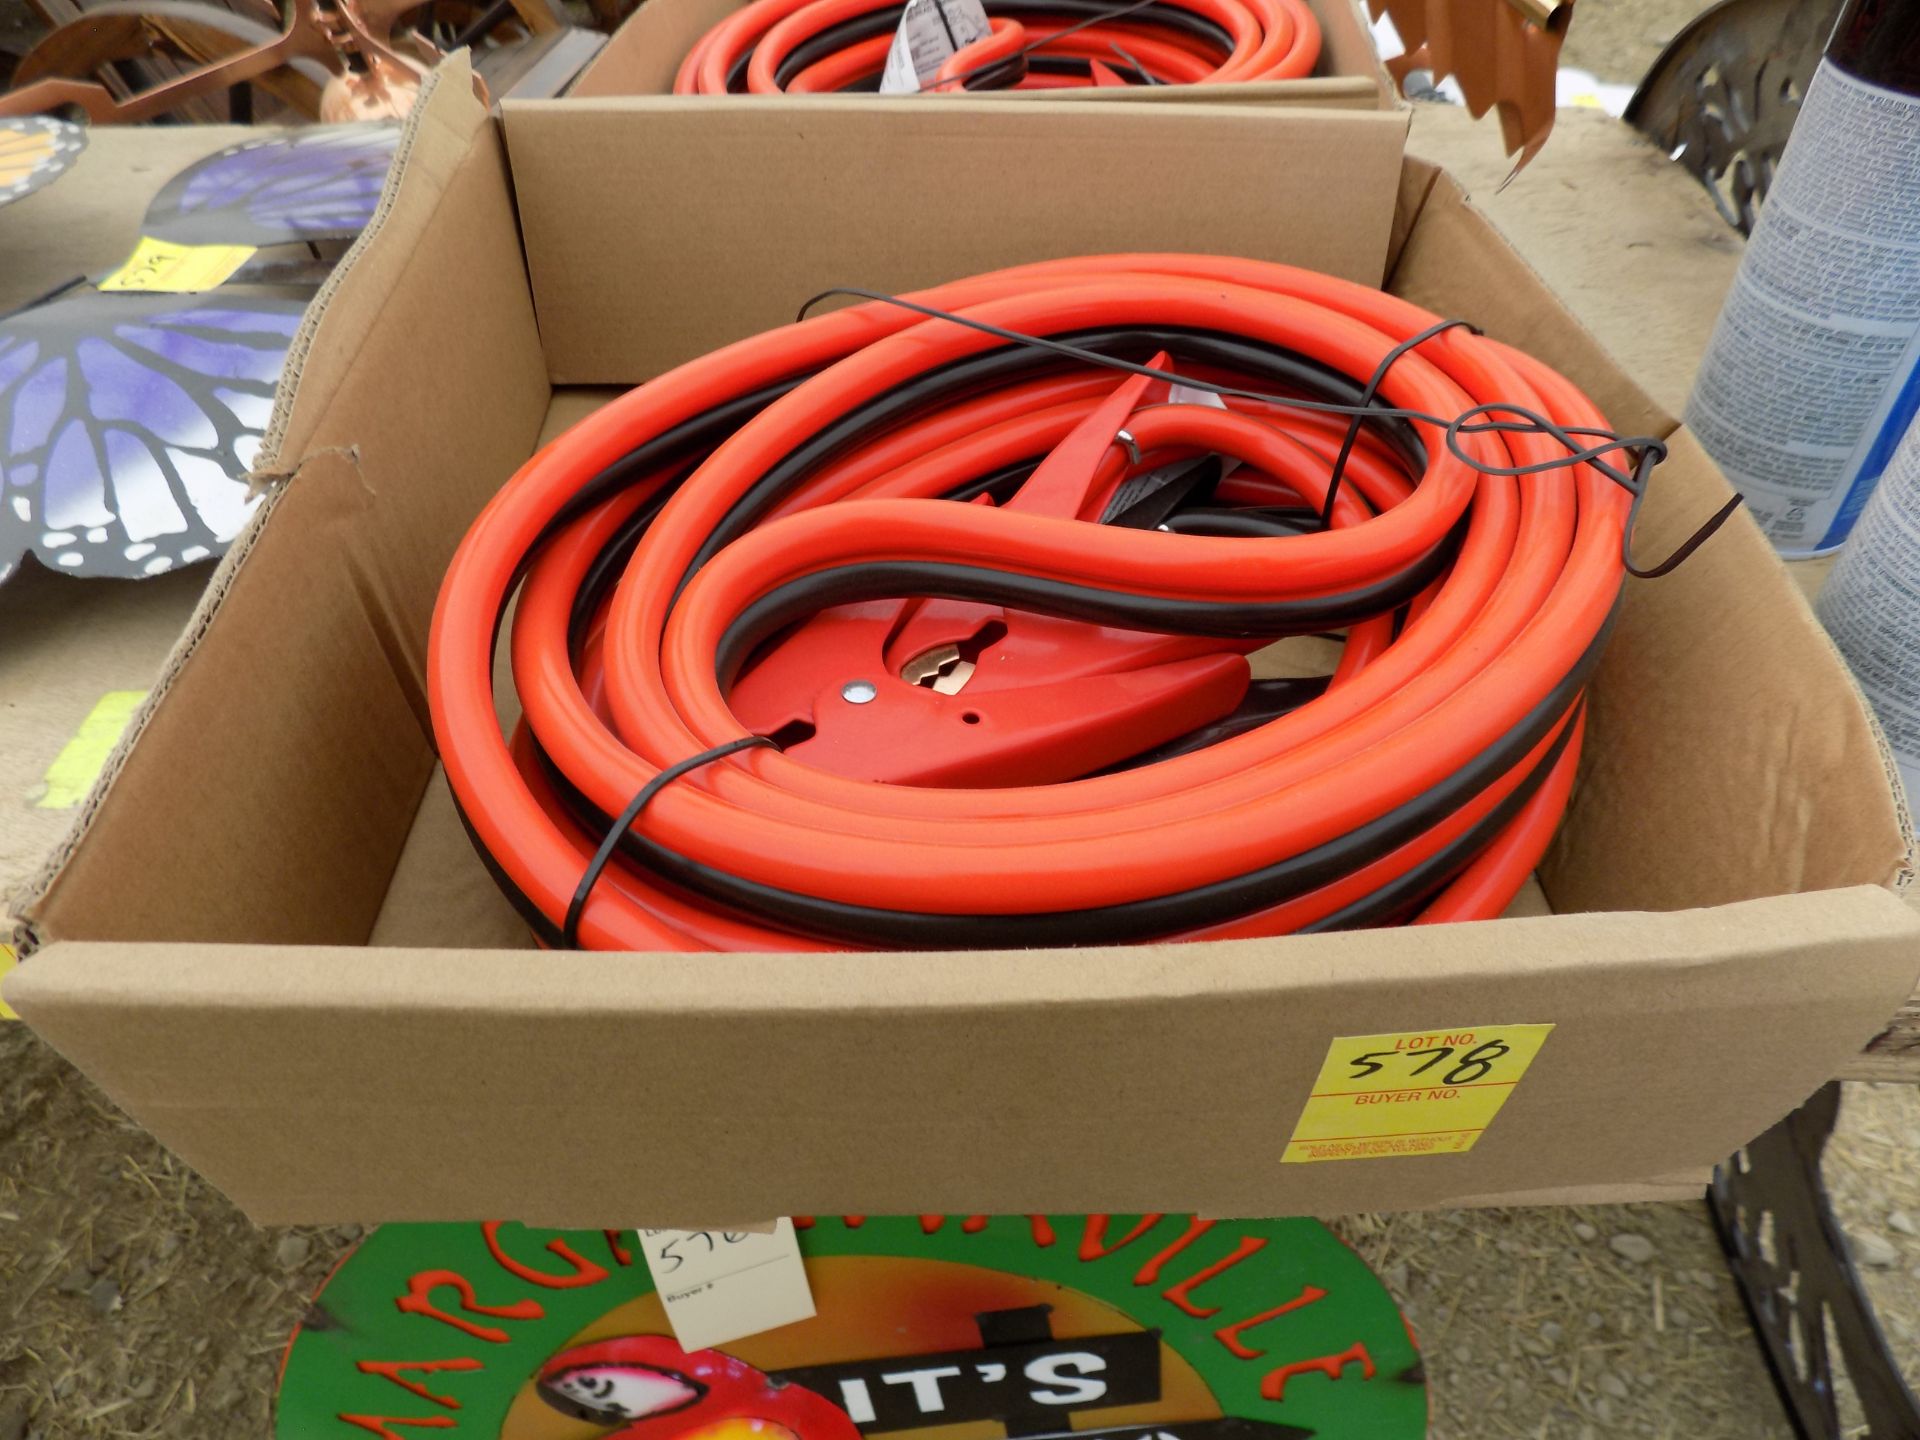 New, Heavy Duty Jumper Cables